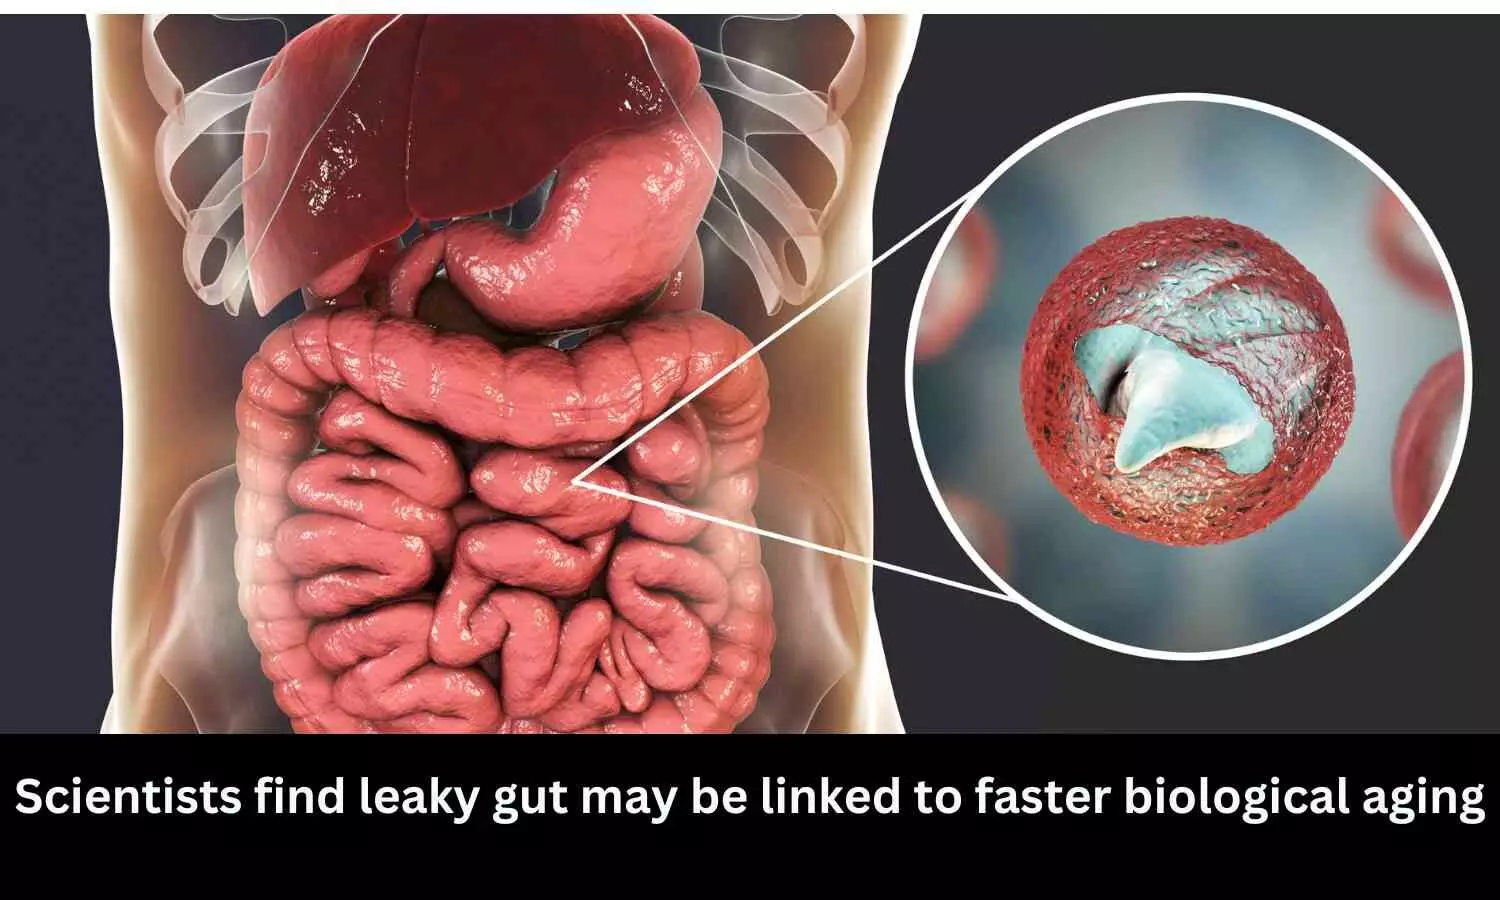 Scientists find leaky gut may be linked to faster biological aging